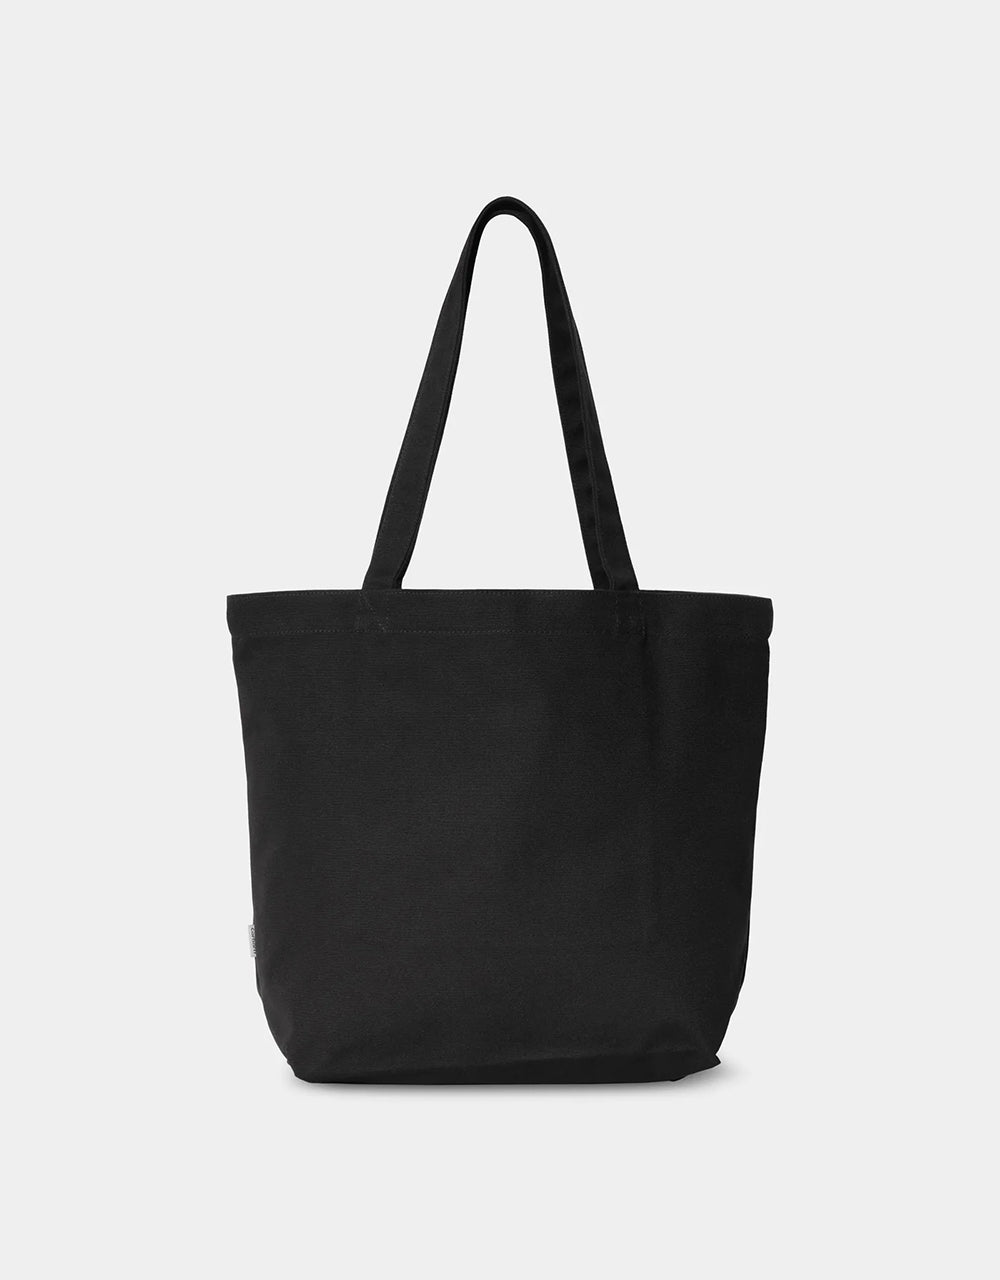 Carhartt WIP Canvas Graphic Tote Bag - Class of 89 Print/Black/Tonic